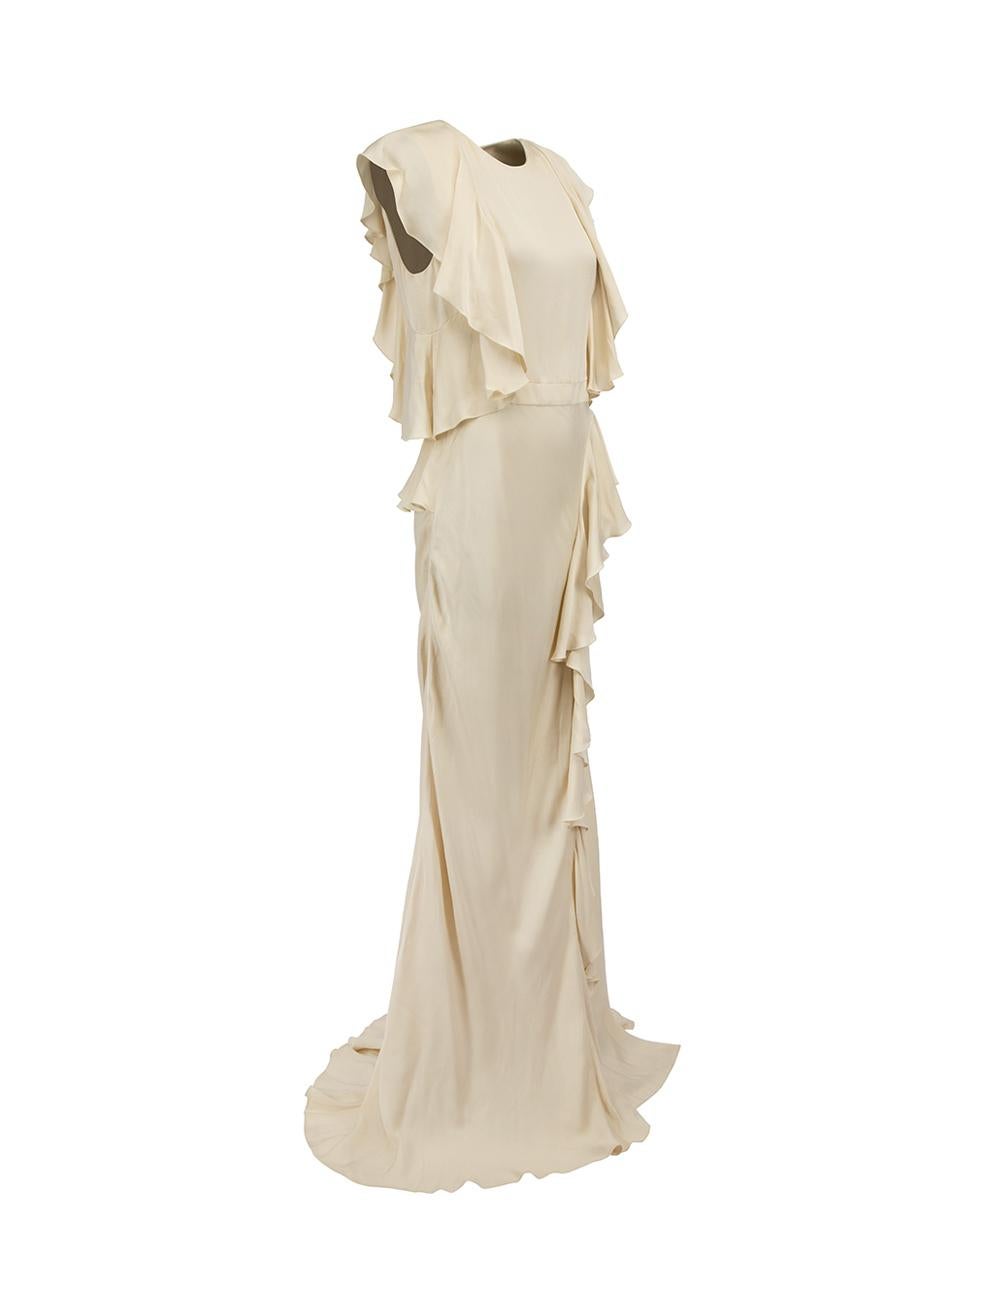 CONDITION is Never worn, with tags. No visible wear to gown is evident on this new Alexander McQueen designer resale item. 



Details


Cream

Viscose

Maxi gown

Round neckline

Asymmetric ruffles accent

Back zip closure with hook and eye

Fully